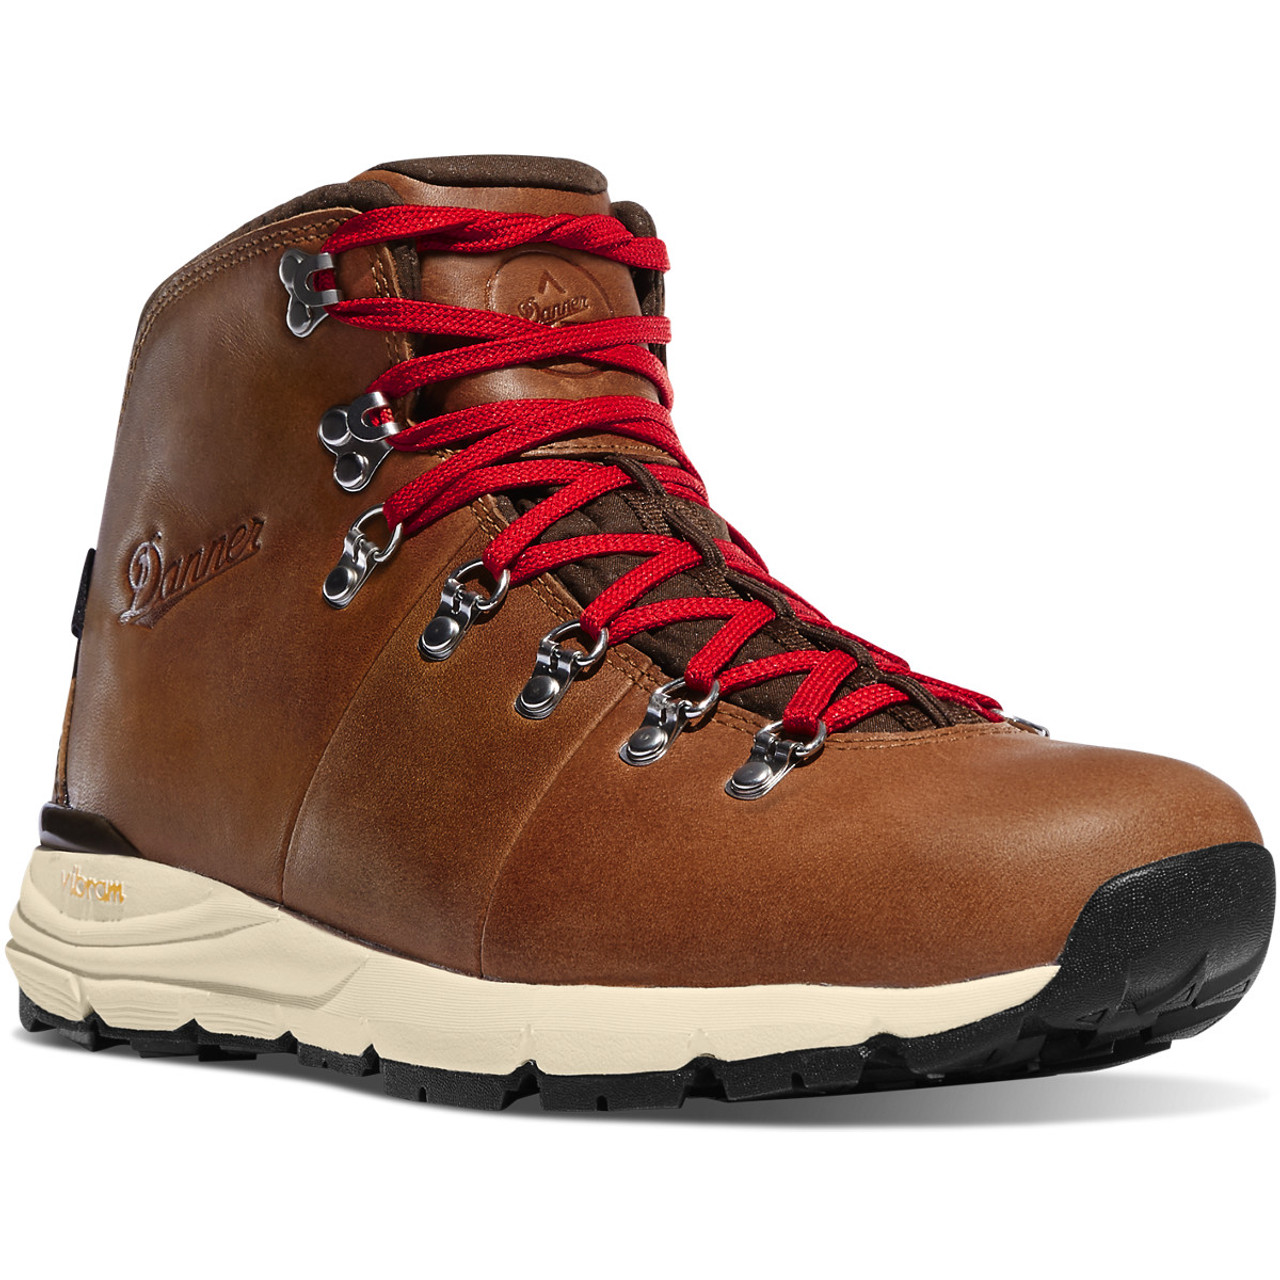 DANNER® MOUNTAIN 600 4.5" SADDLE TAN OUTDOOR BOOTS 62246